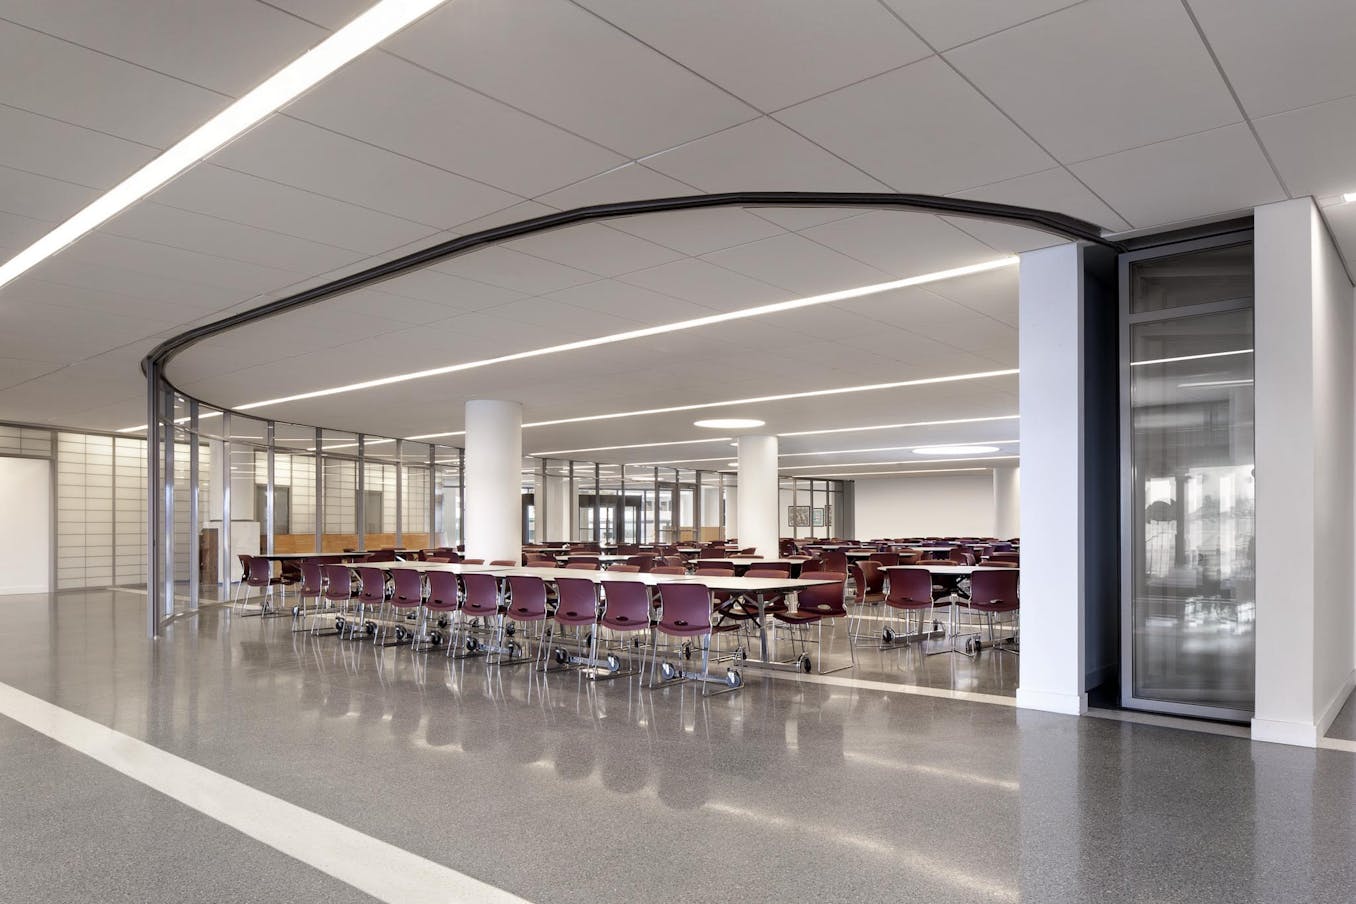 commercial collaborative learning space in school design  - segmented curved sliding walls opened exterior 